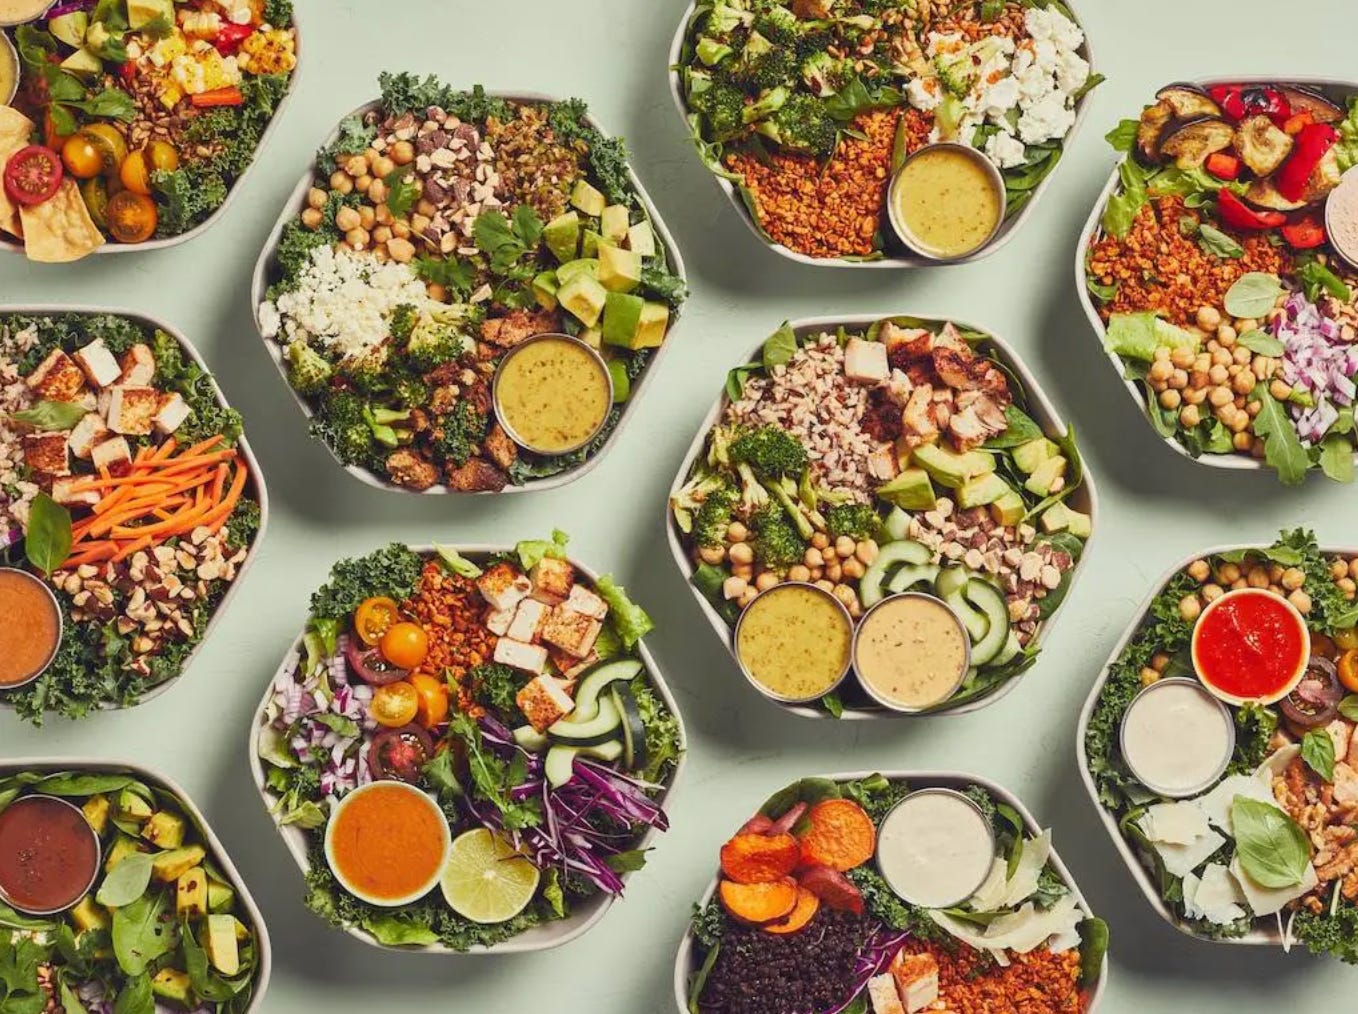 New Sweetgreen Location Brings Fast and Healthy Options to Ann Arbor -  Current Magazine